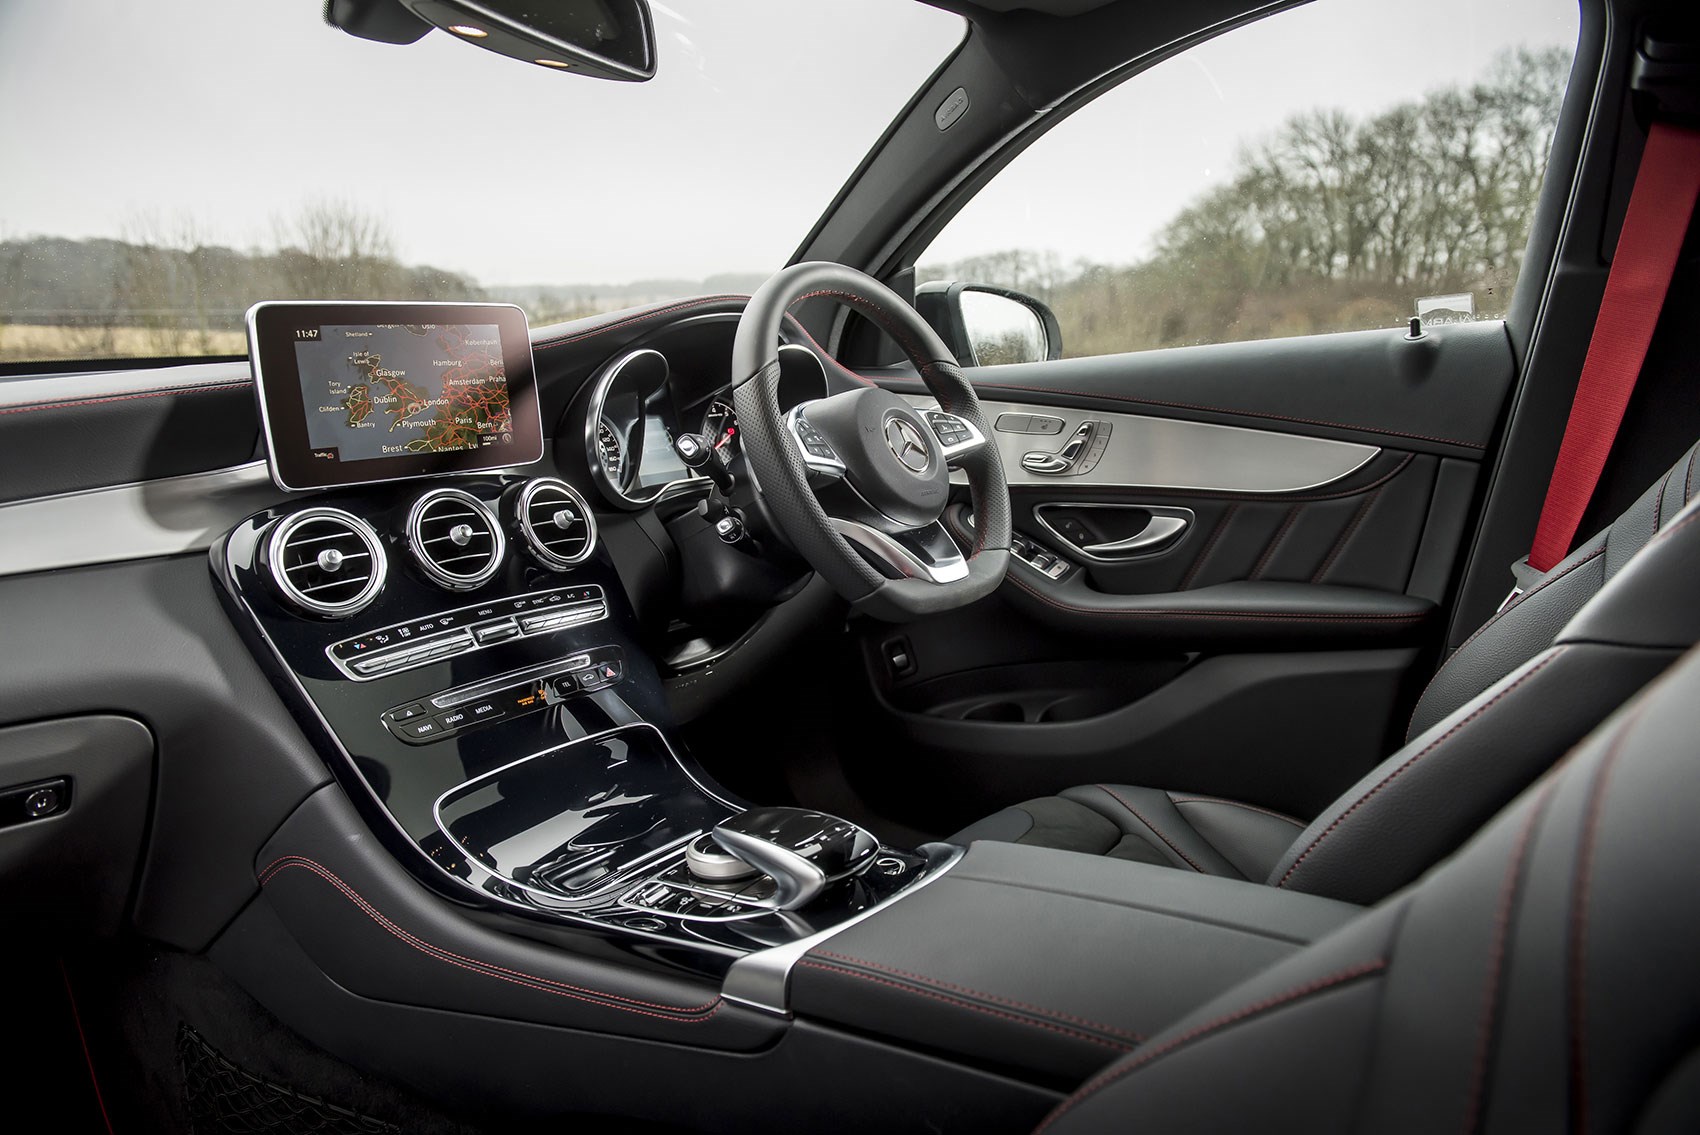 Inside the Mercedes-AMG GLC43 4Matic Coupe cabin